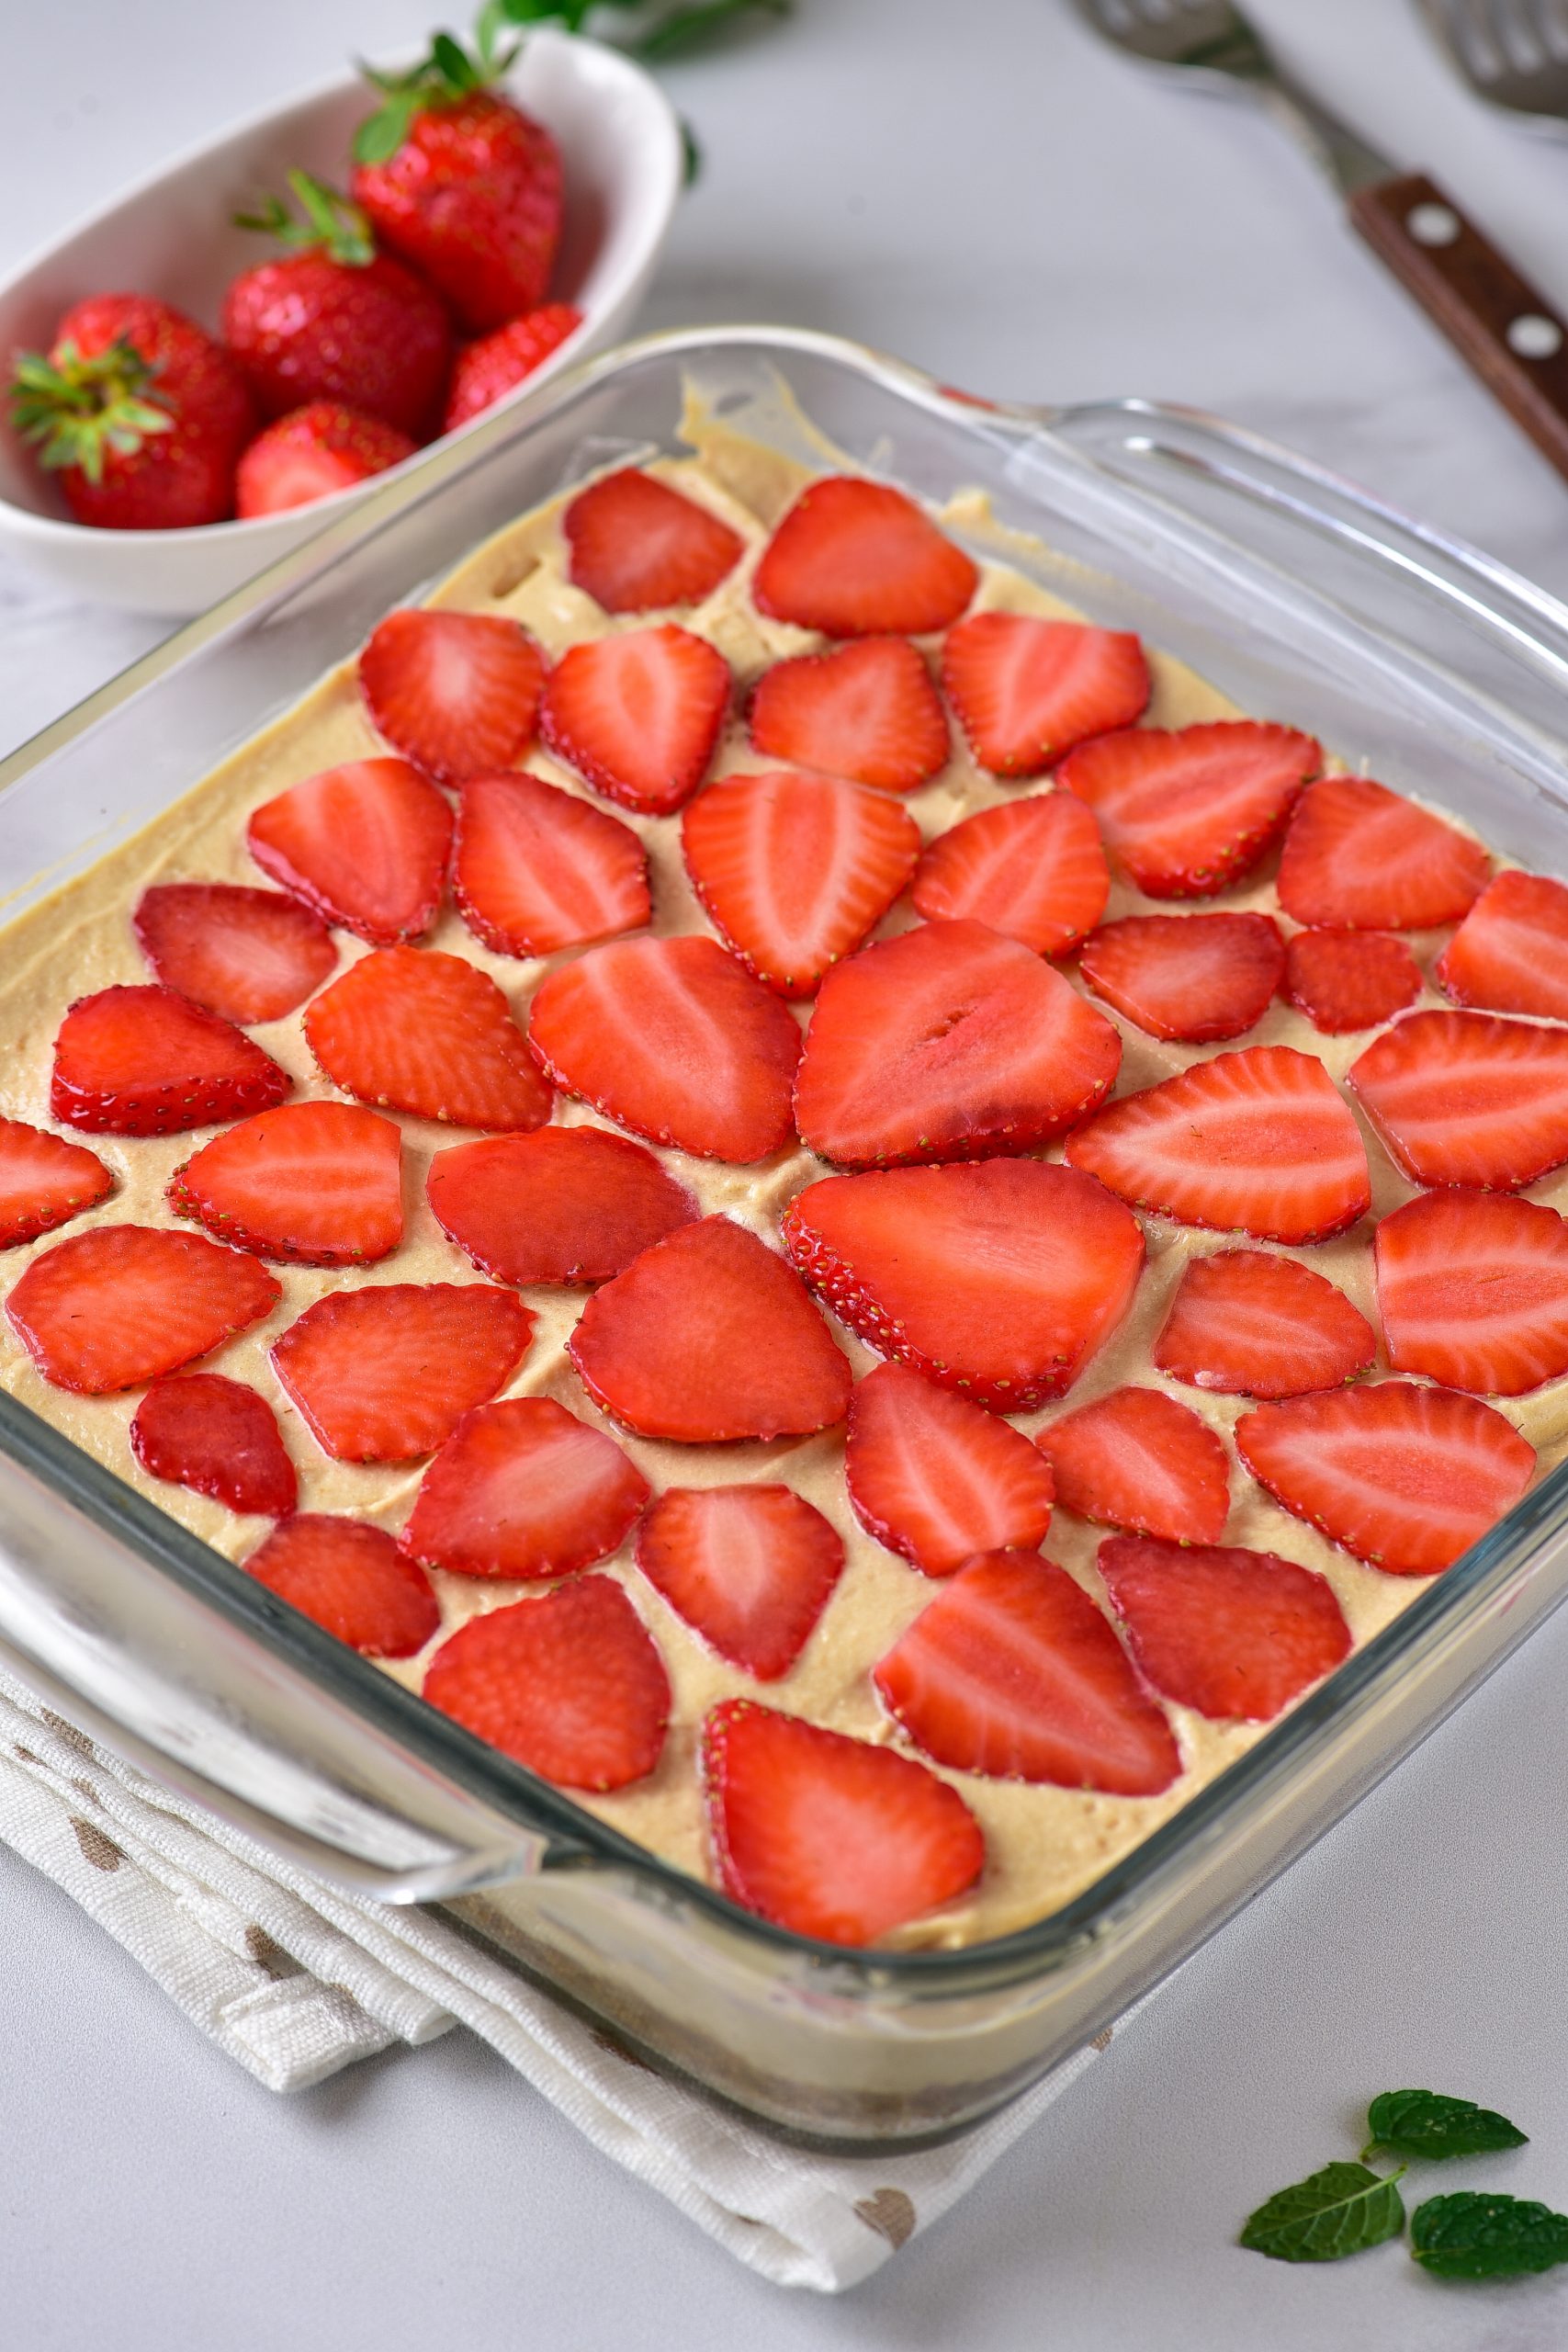 Spread the remaining cheesecake mixture into the pie plate, and top with the remaining strawberries. 